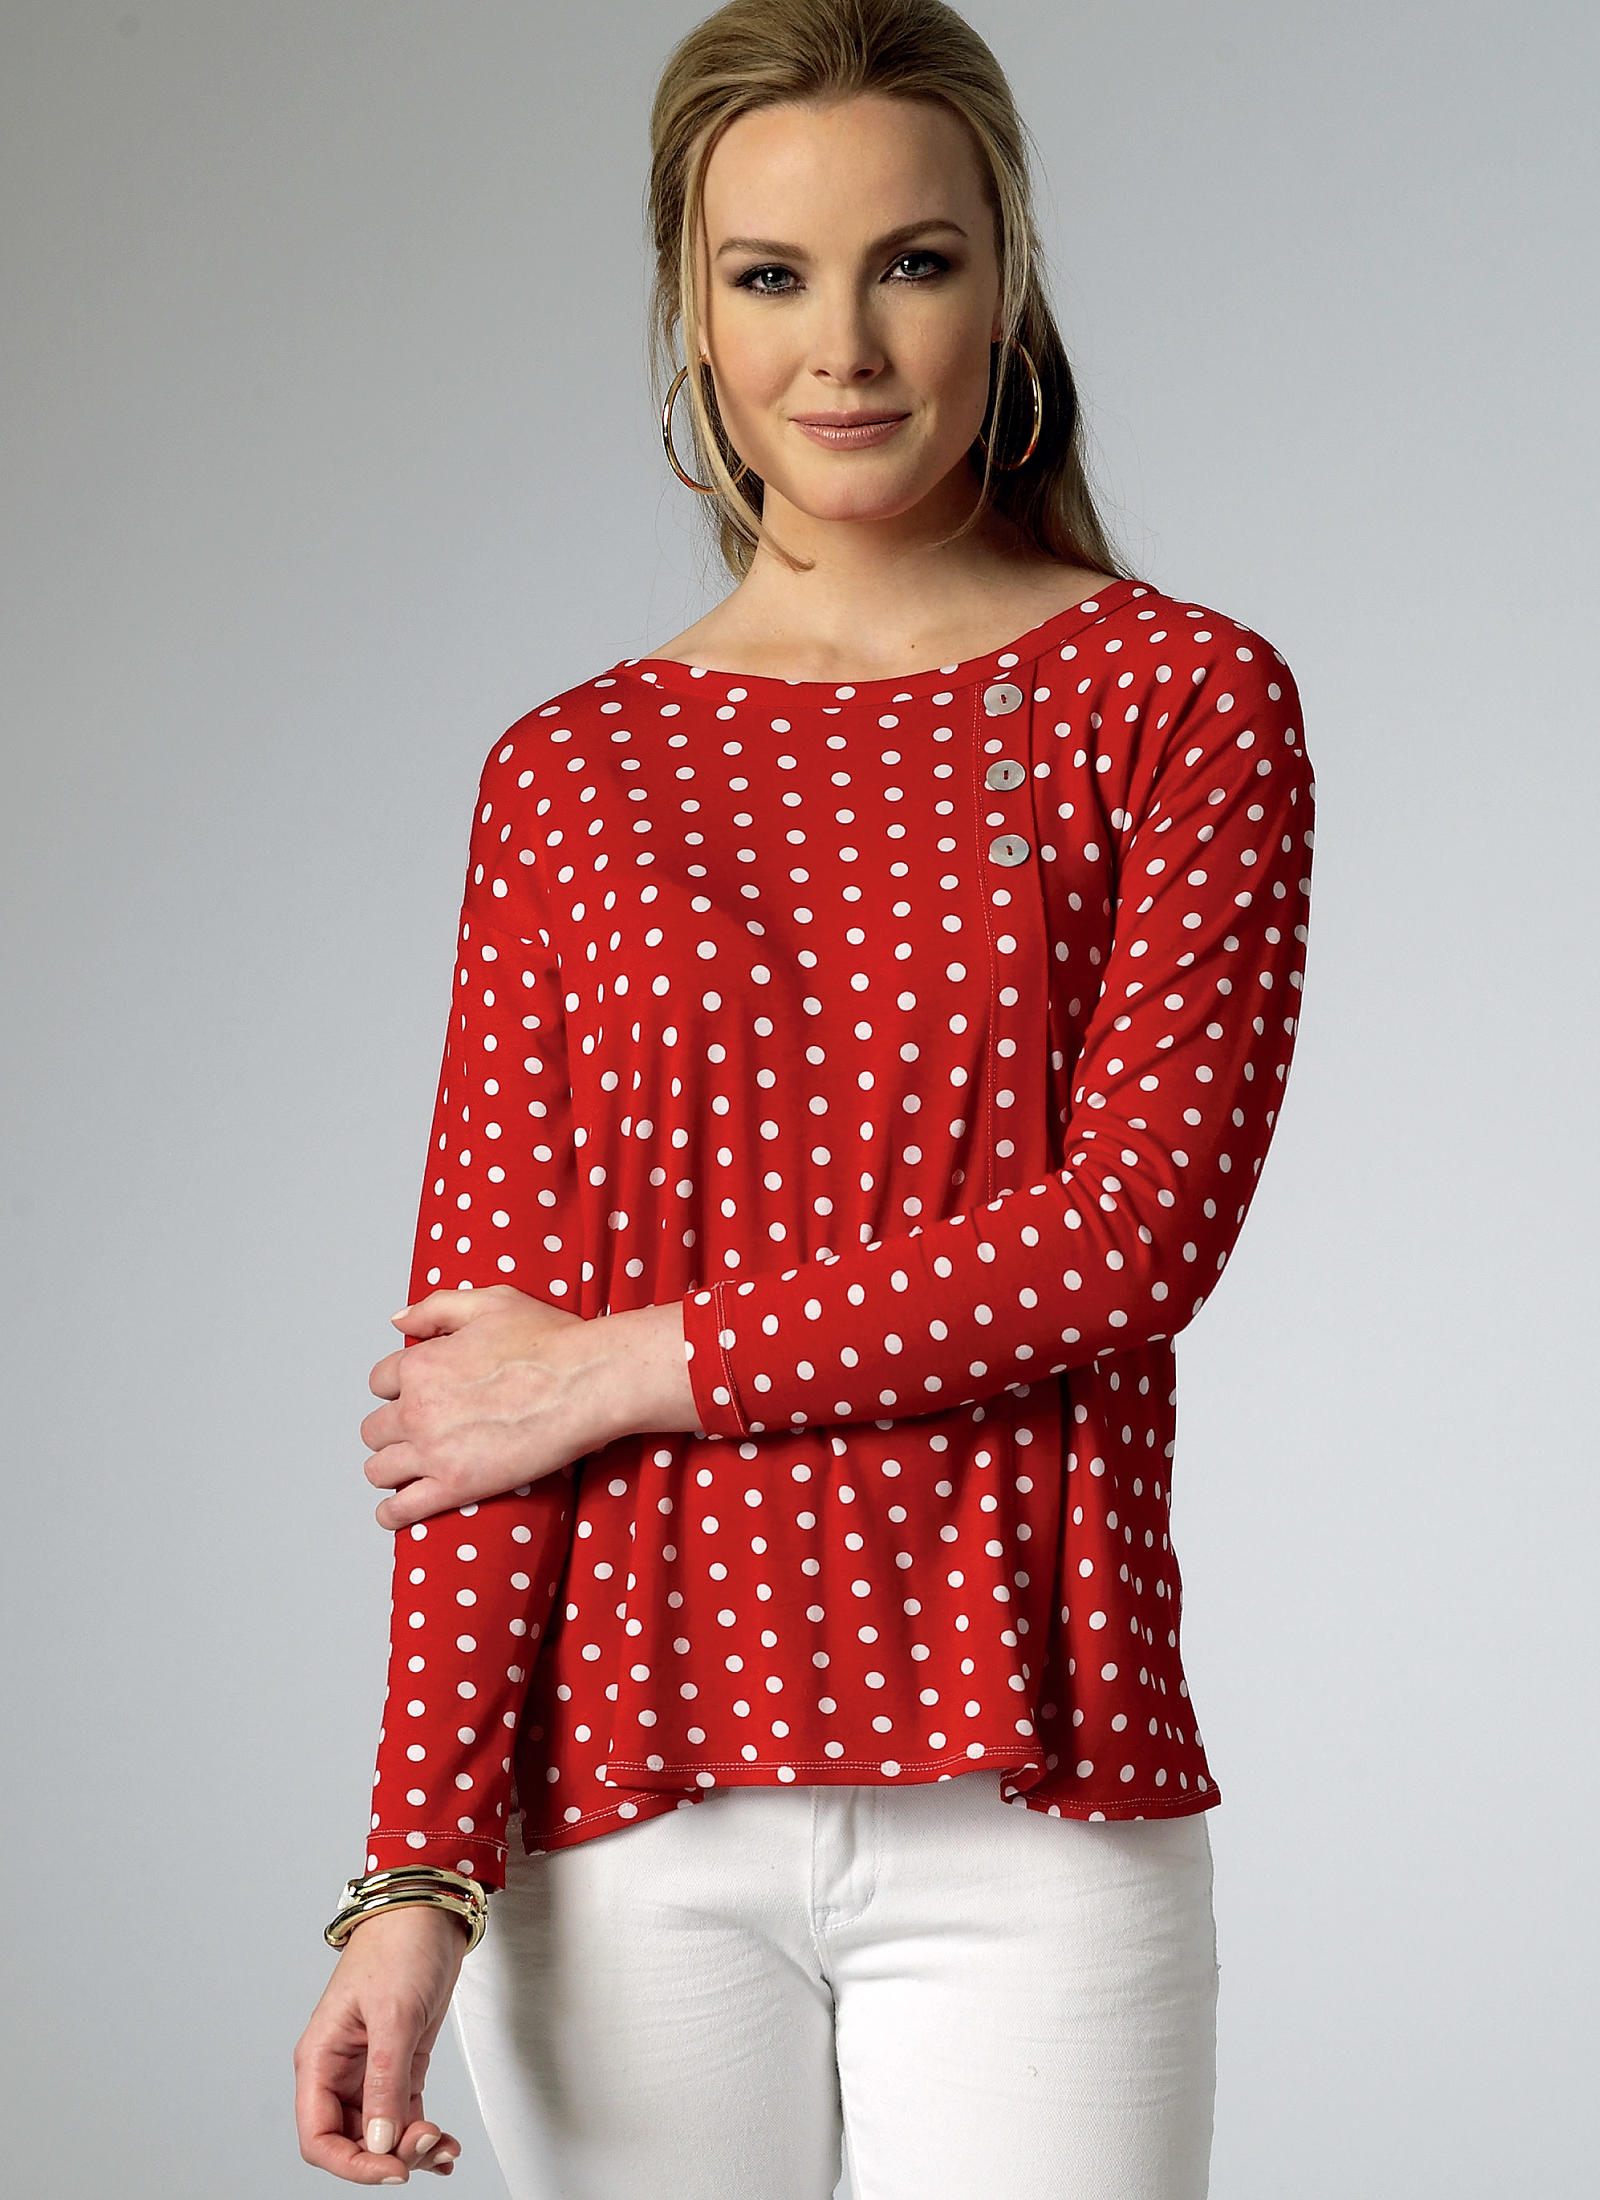 Woman modeling a red and white polka dot top